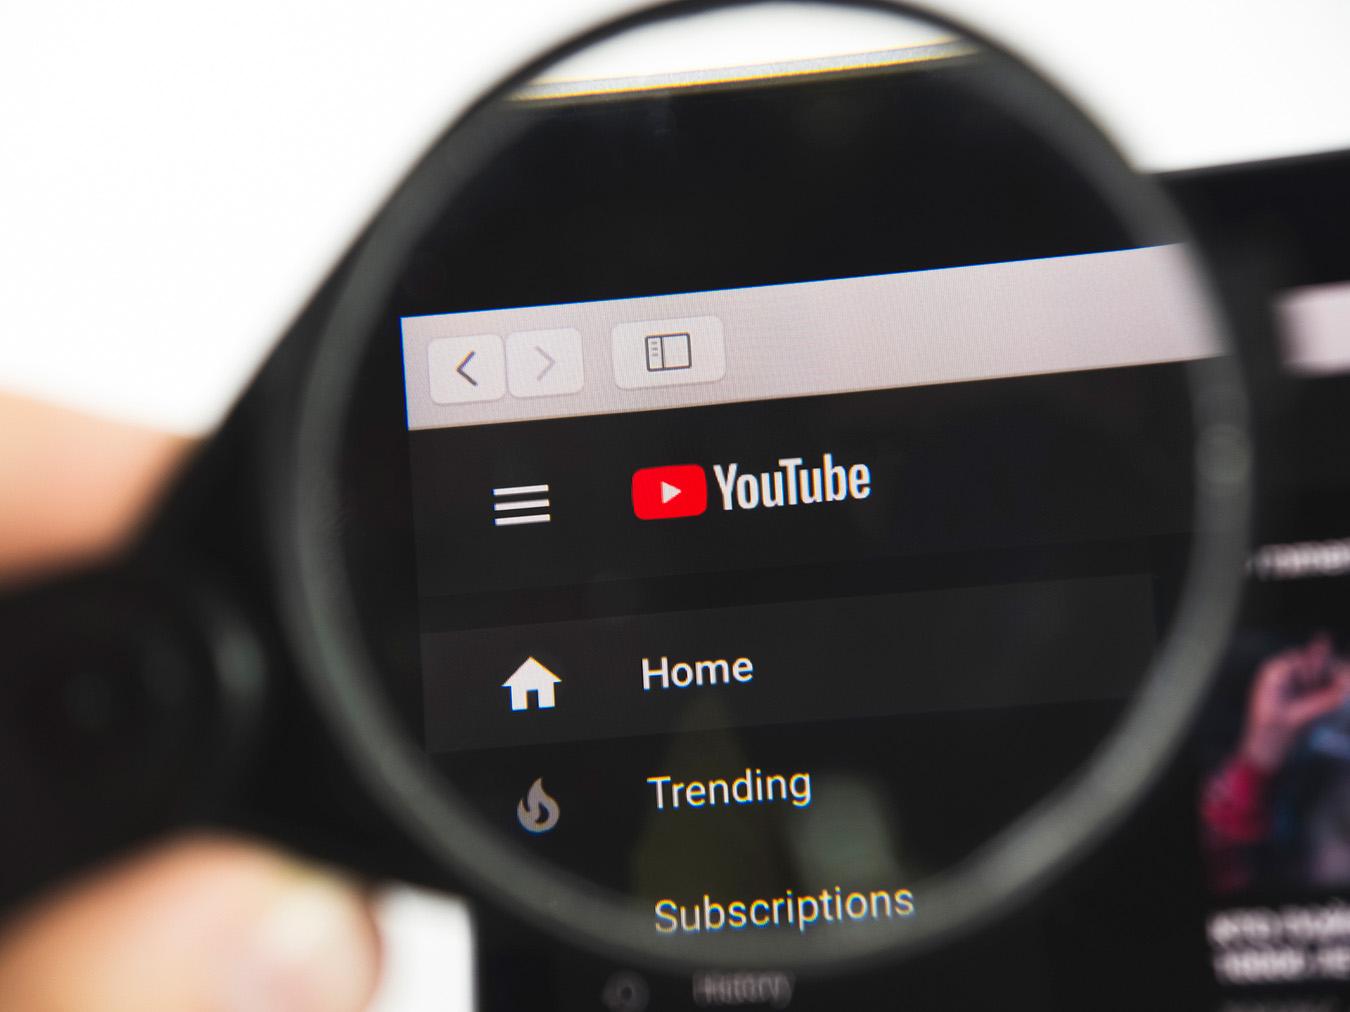 How does youtube work? Magnifying glass highlighting Youtube homepage